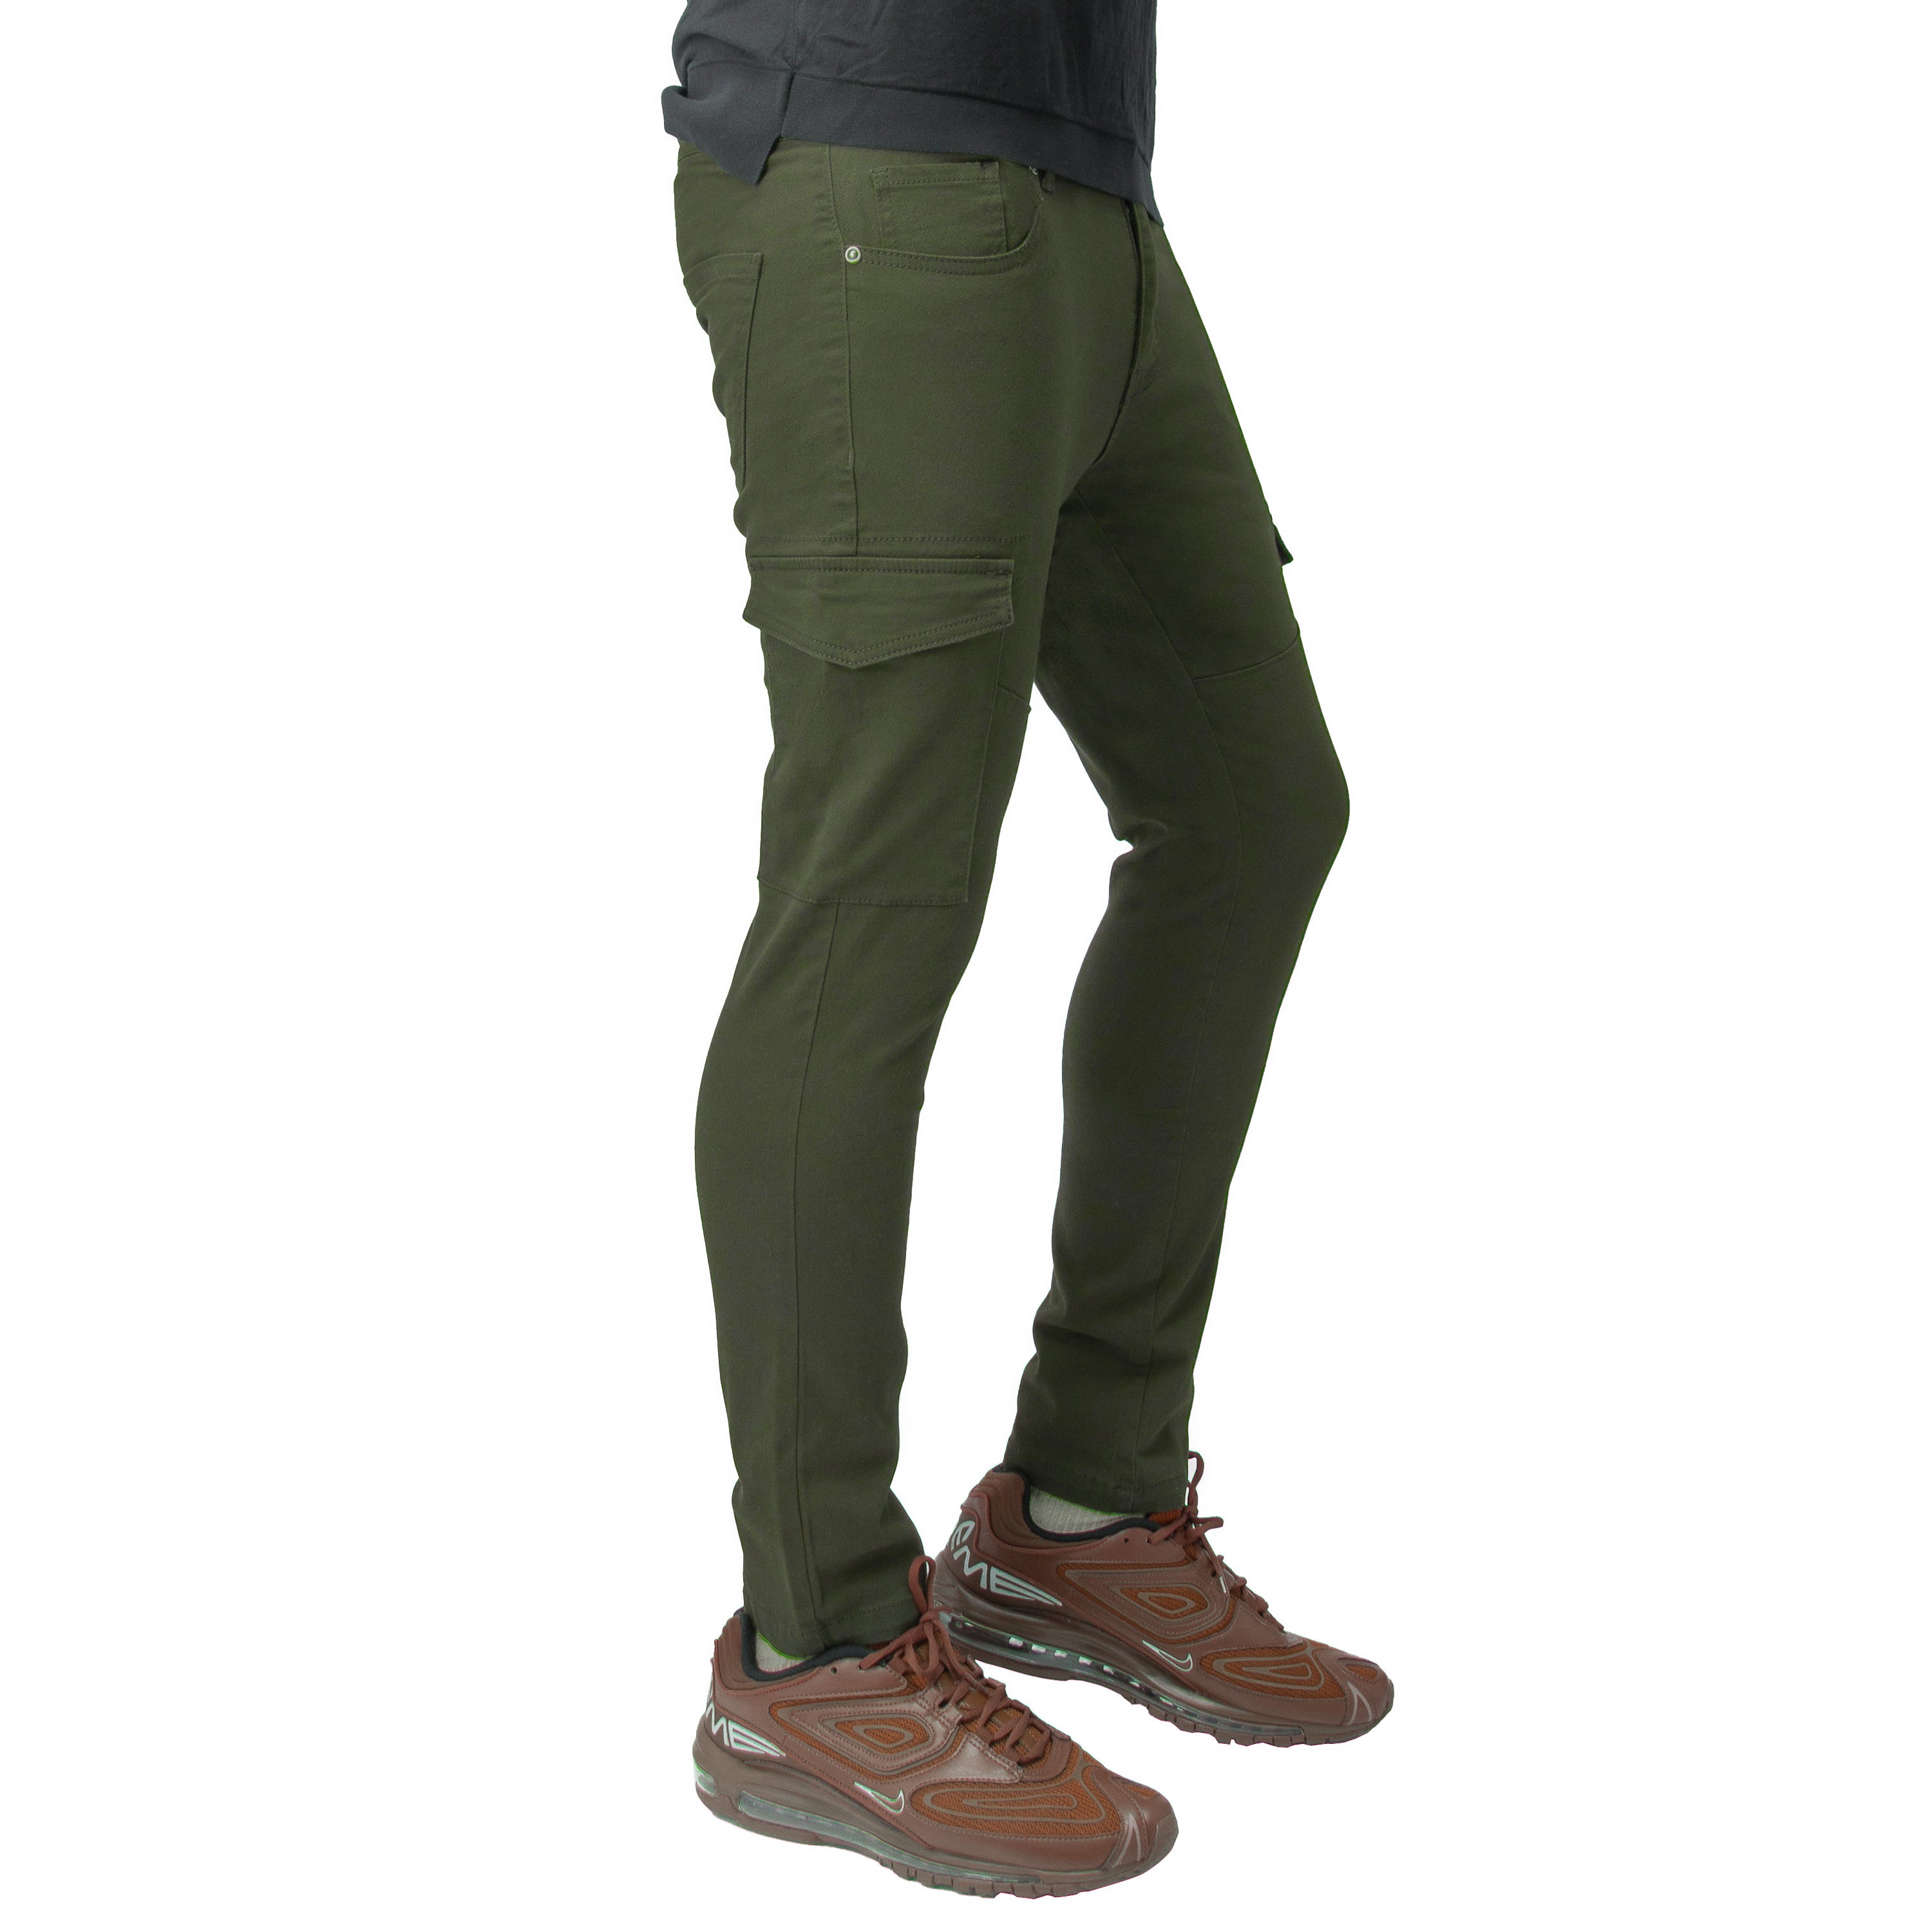 X RAY Slim Fit Stretch Colored Denim Commuter Pants – X-RAY JEANS